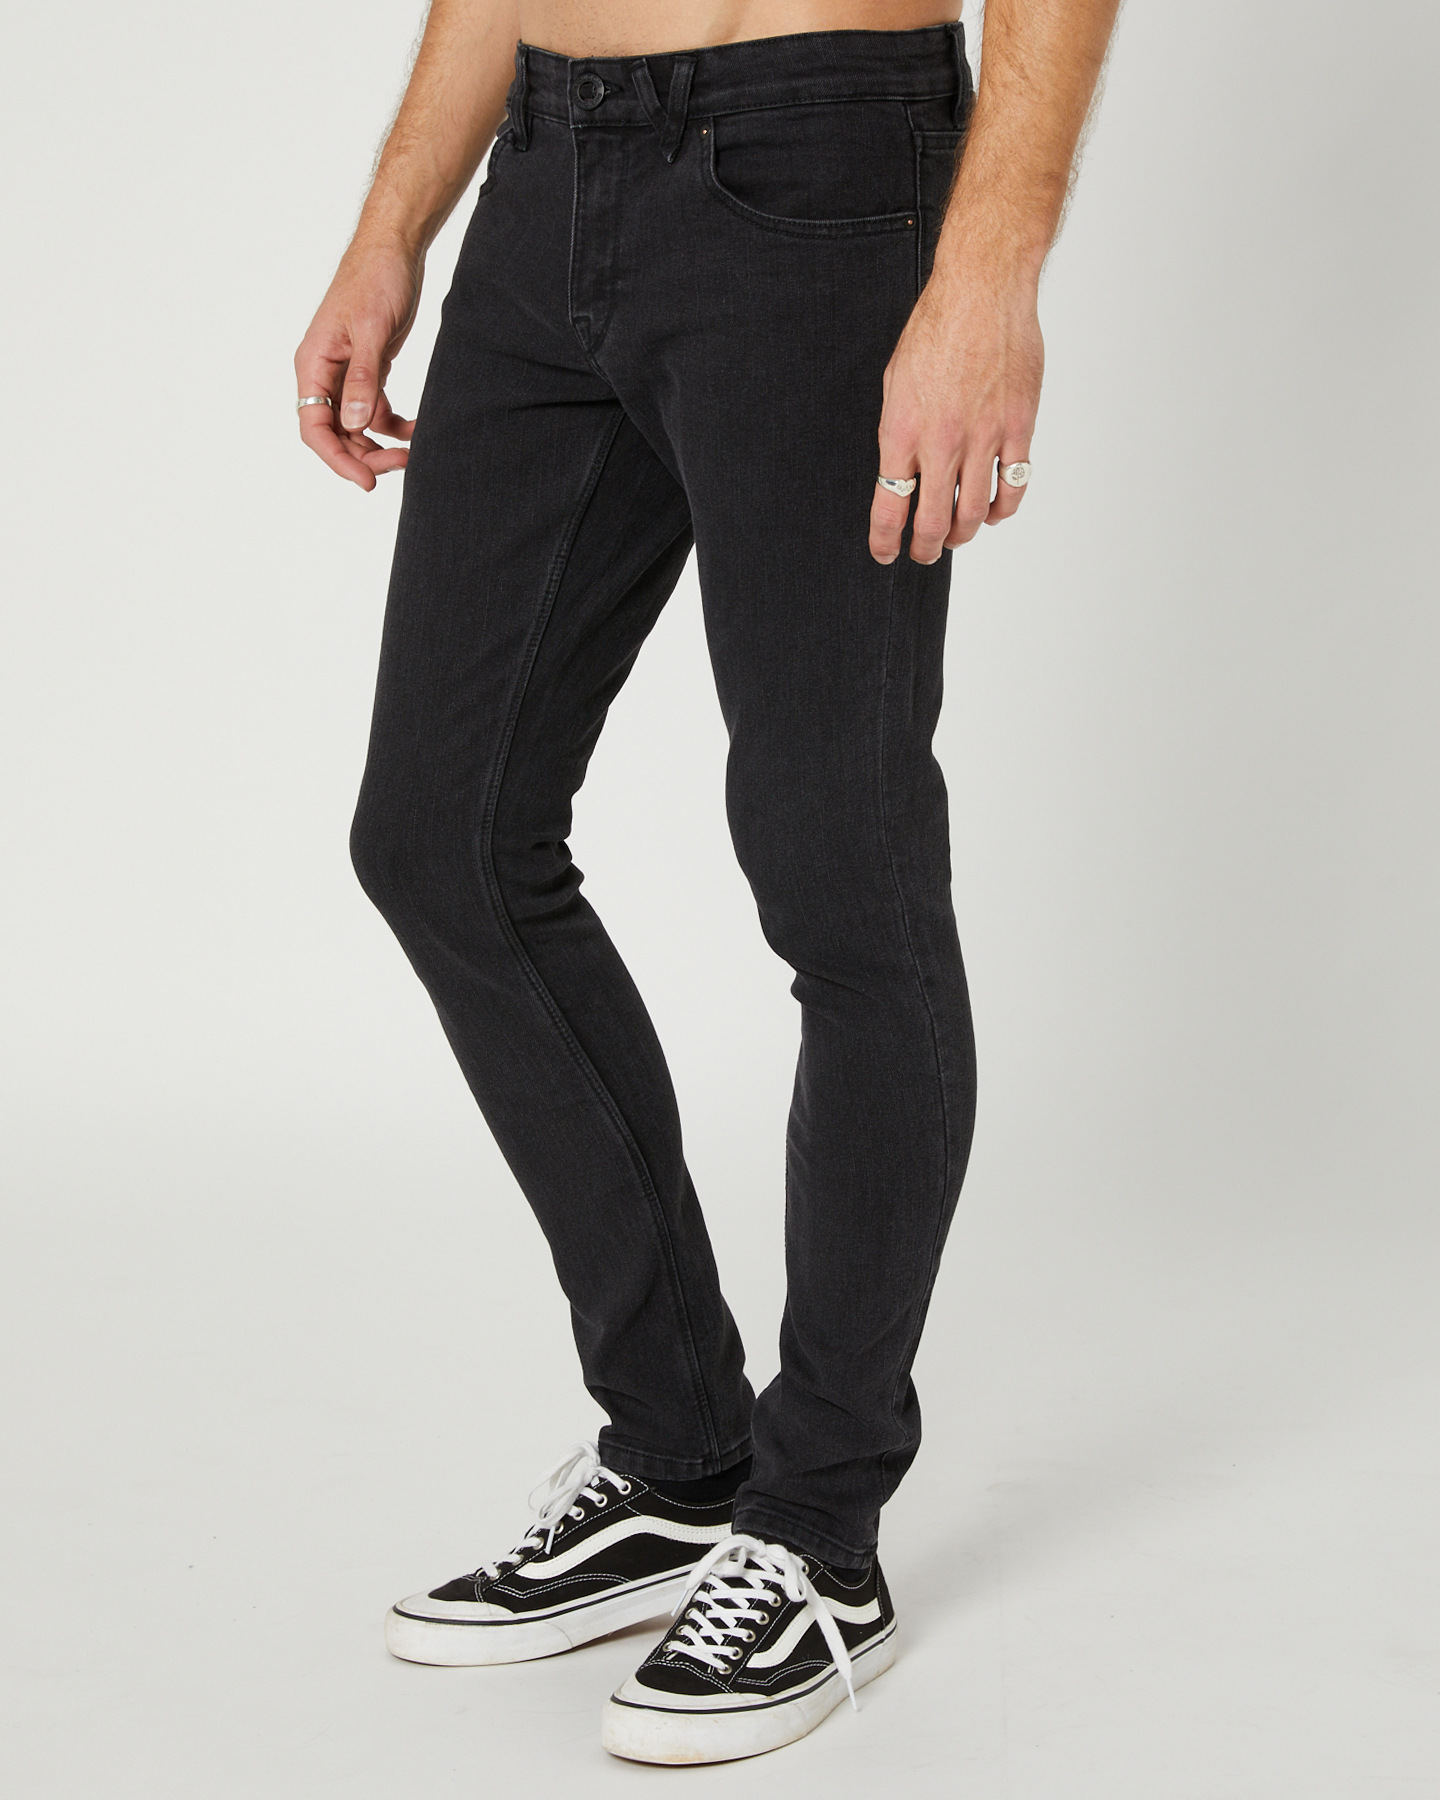 Volcom 2X4 Tapered Mens Jean - Washed Black Out | SurfStitch